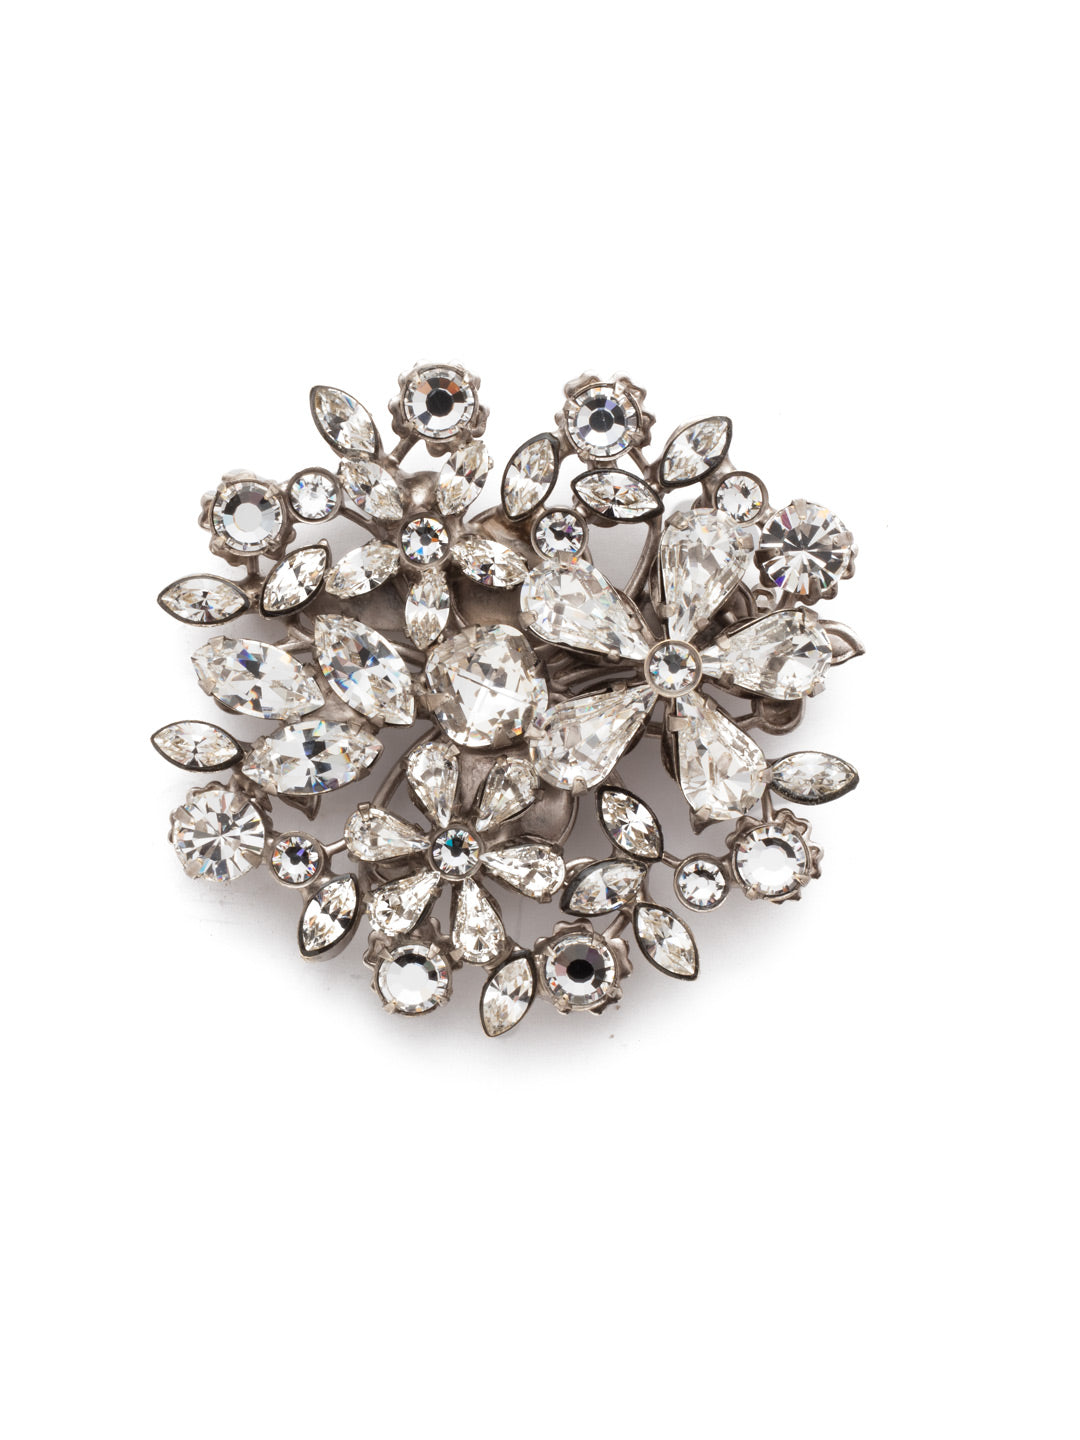 Floral Cluster Brooch Pin - PBK47ASCRY - <p>Clusters of floral-styled crystals form an intricate, sparkling design. From Sorrelli's Crystal collection in our Antique Silver-tone finish.</p>